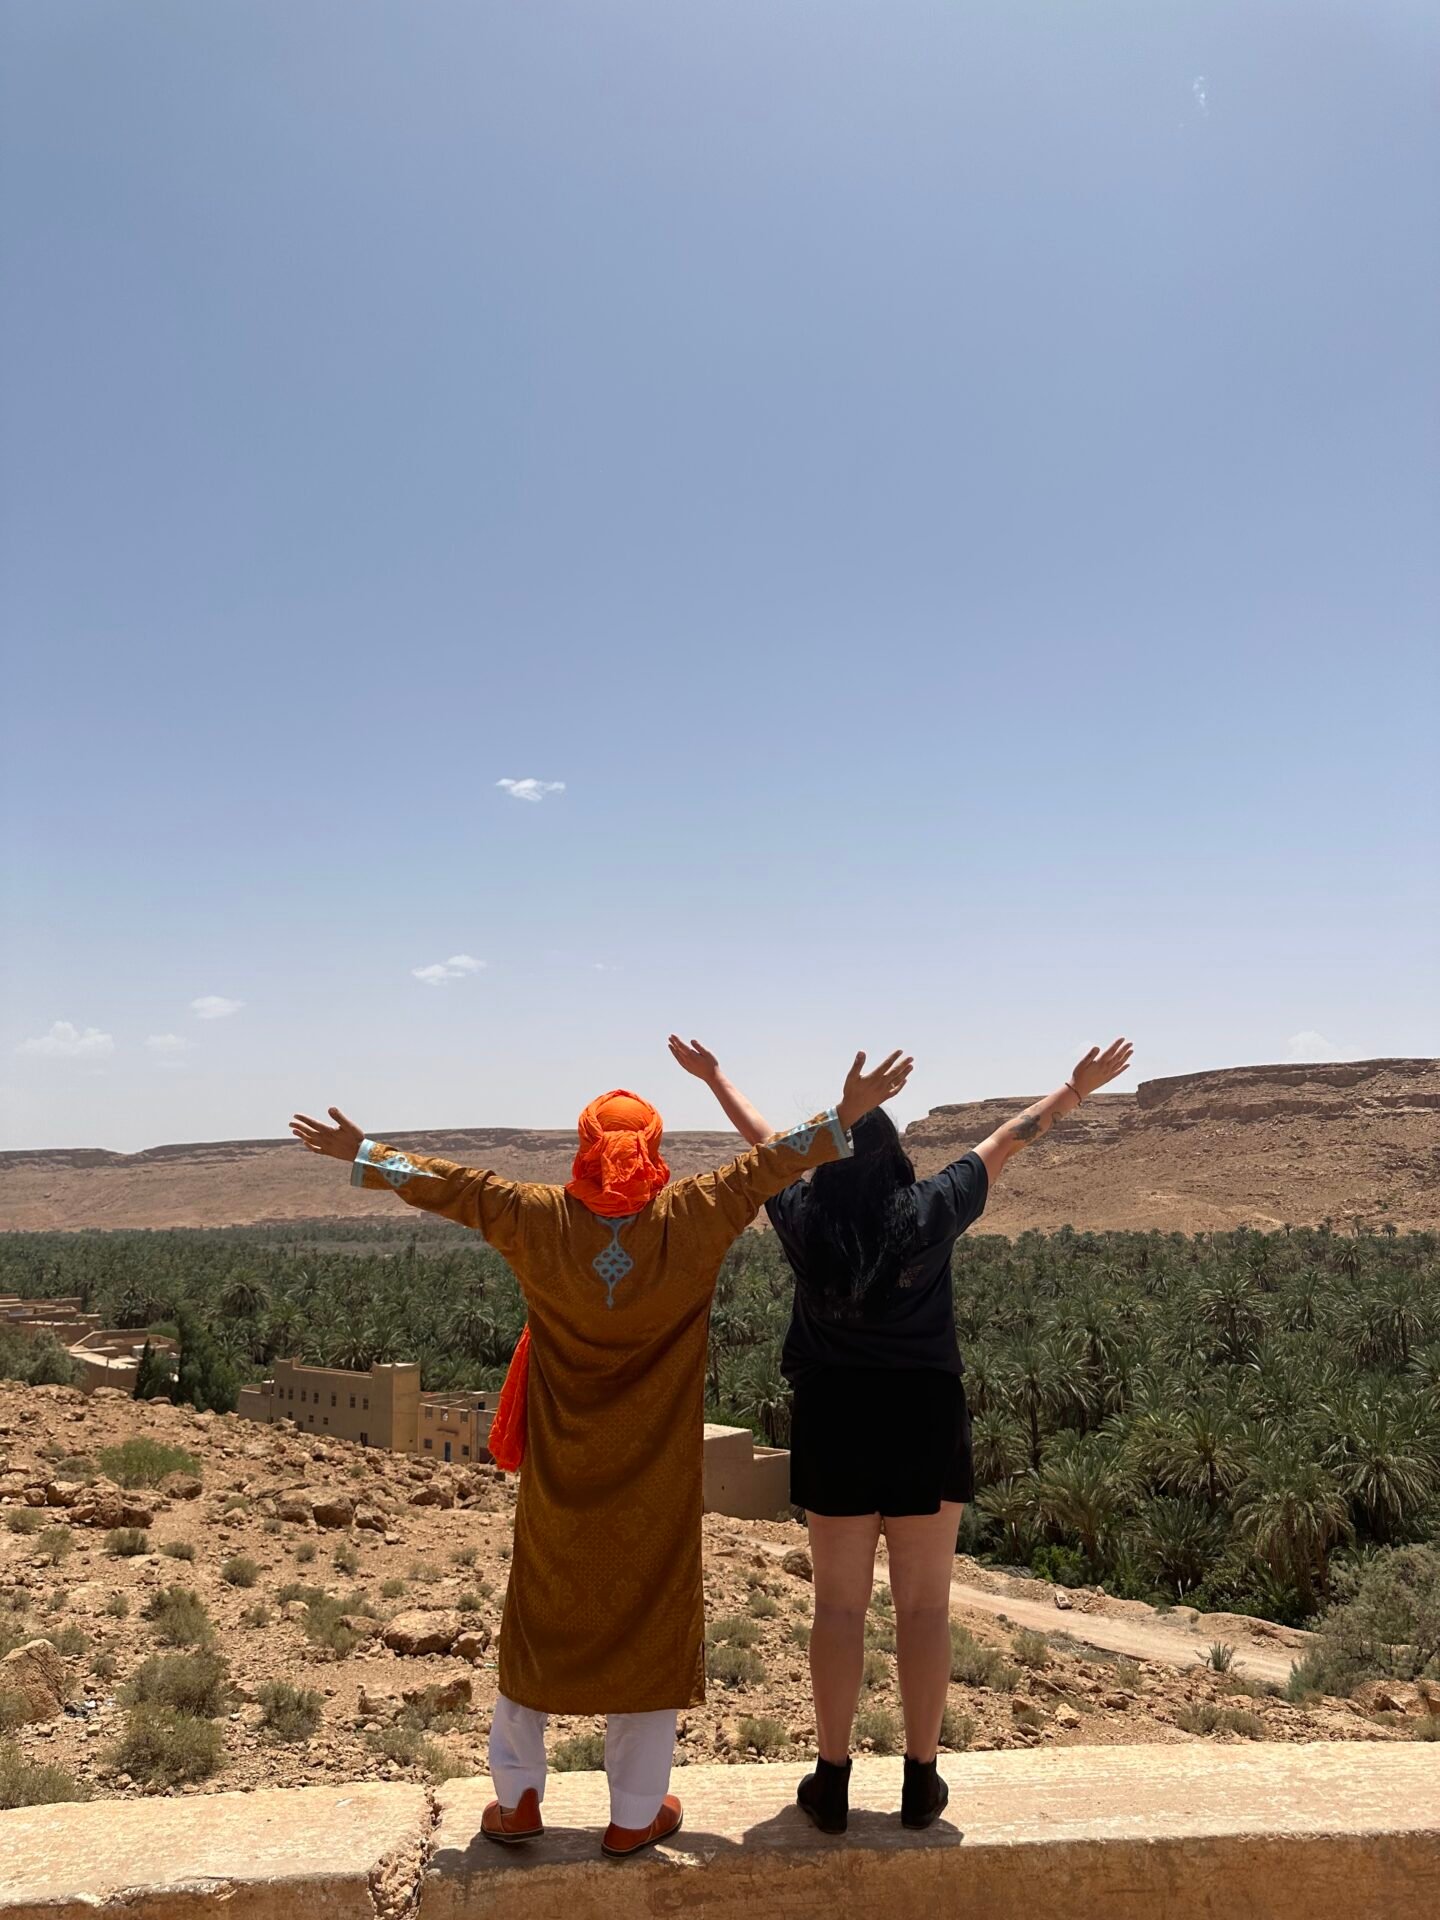 Gazing upon a tranquil oasis in the Moroccan desert, the lush greenery contrasts with the arid surroundings. The heat shimmers in the air, evoking a sense of warmth and solitude amidst the beauty of the oasis.